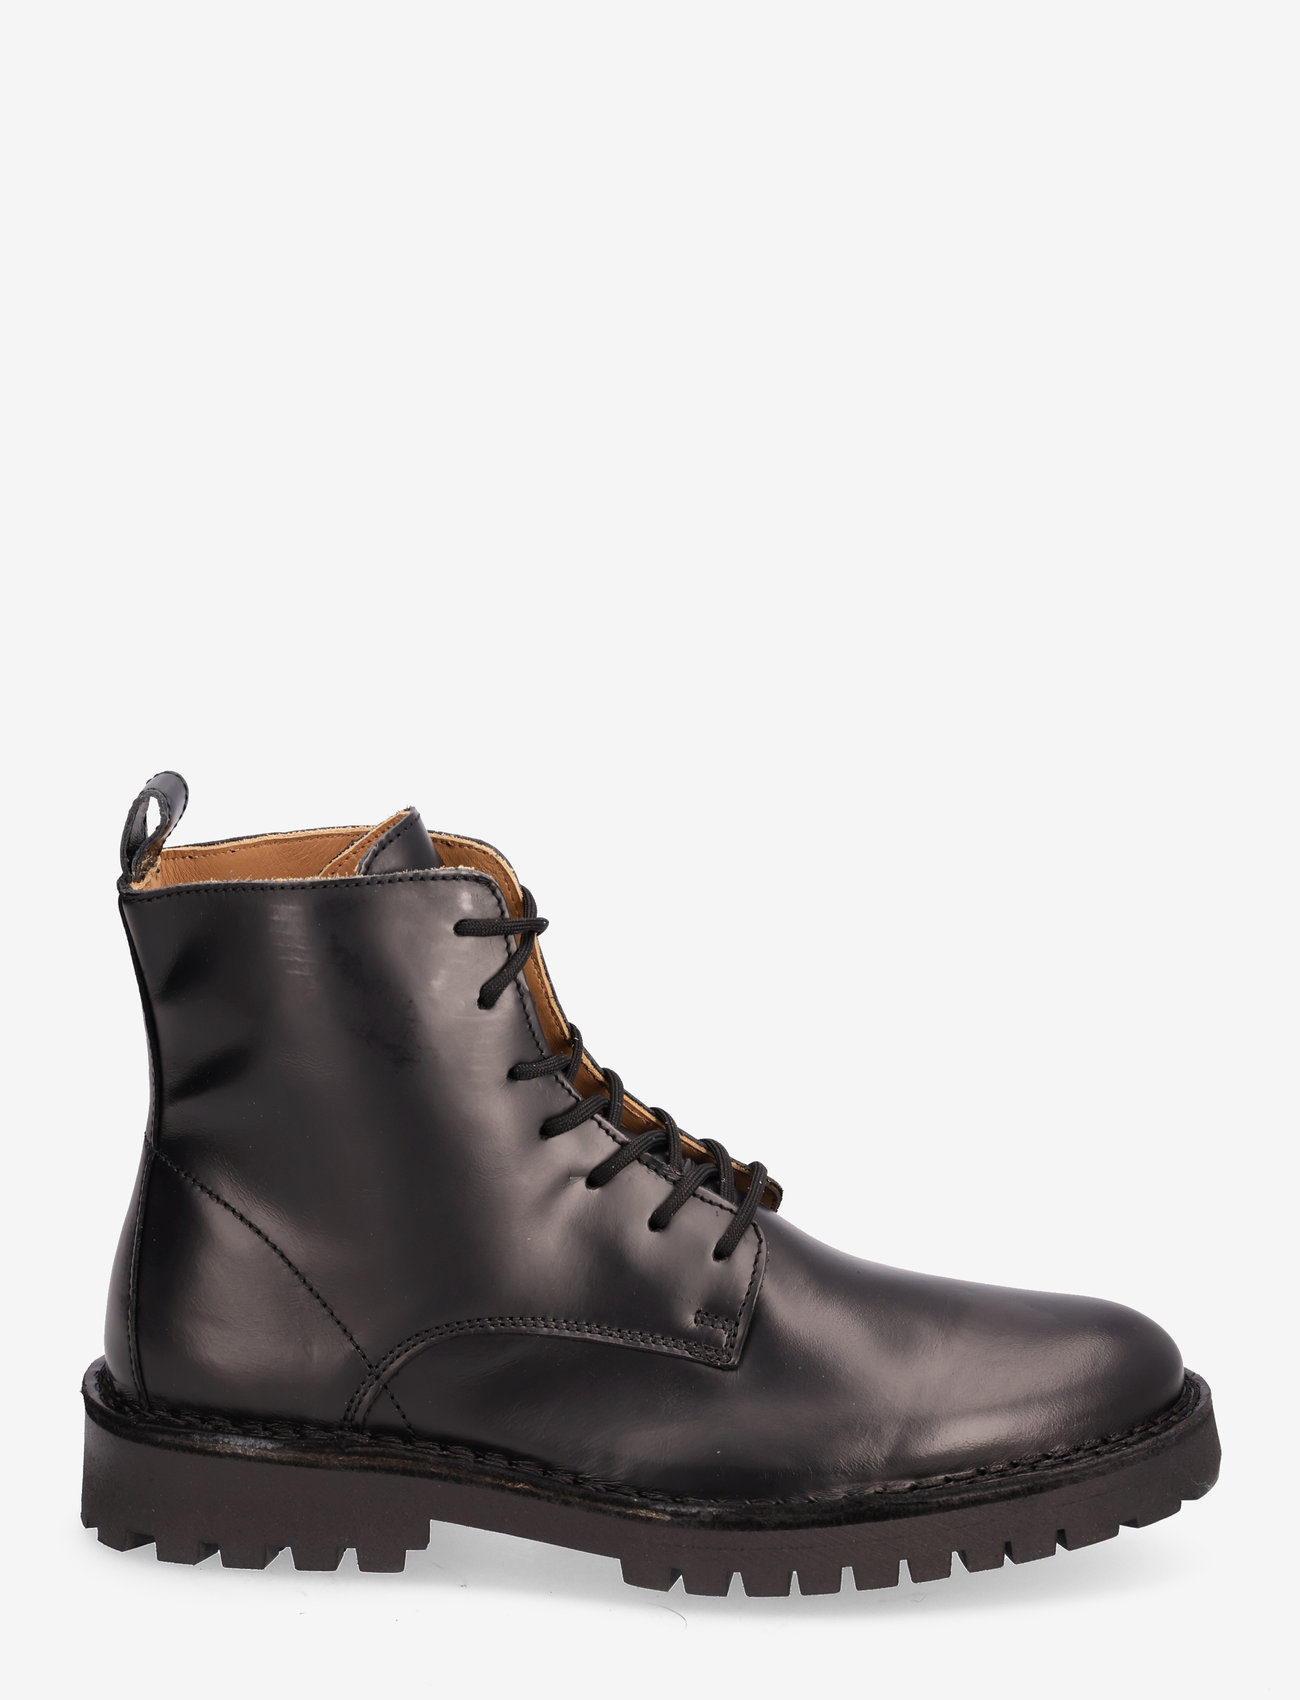 Selected Homme - SLHRICKY LEATHER LACE-UP BOOT - veter schoenen - black - 1